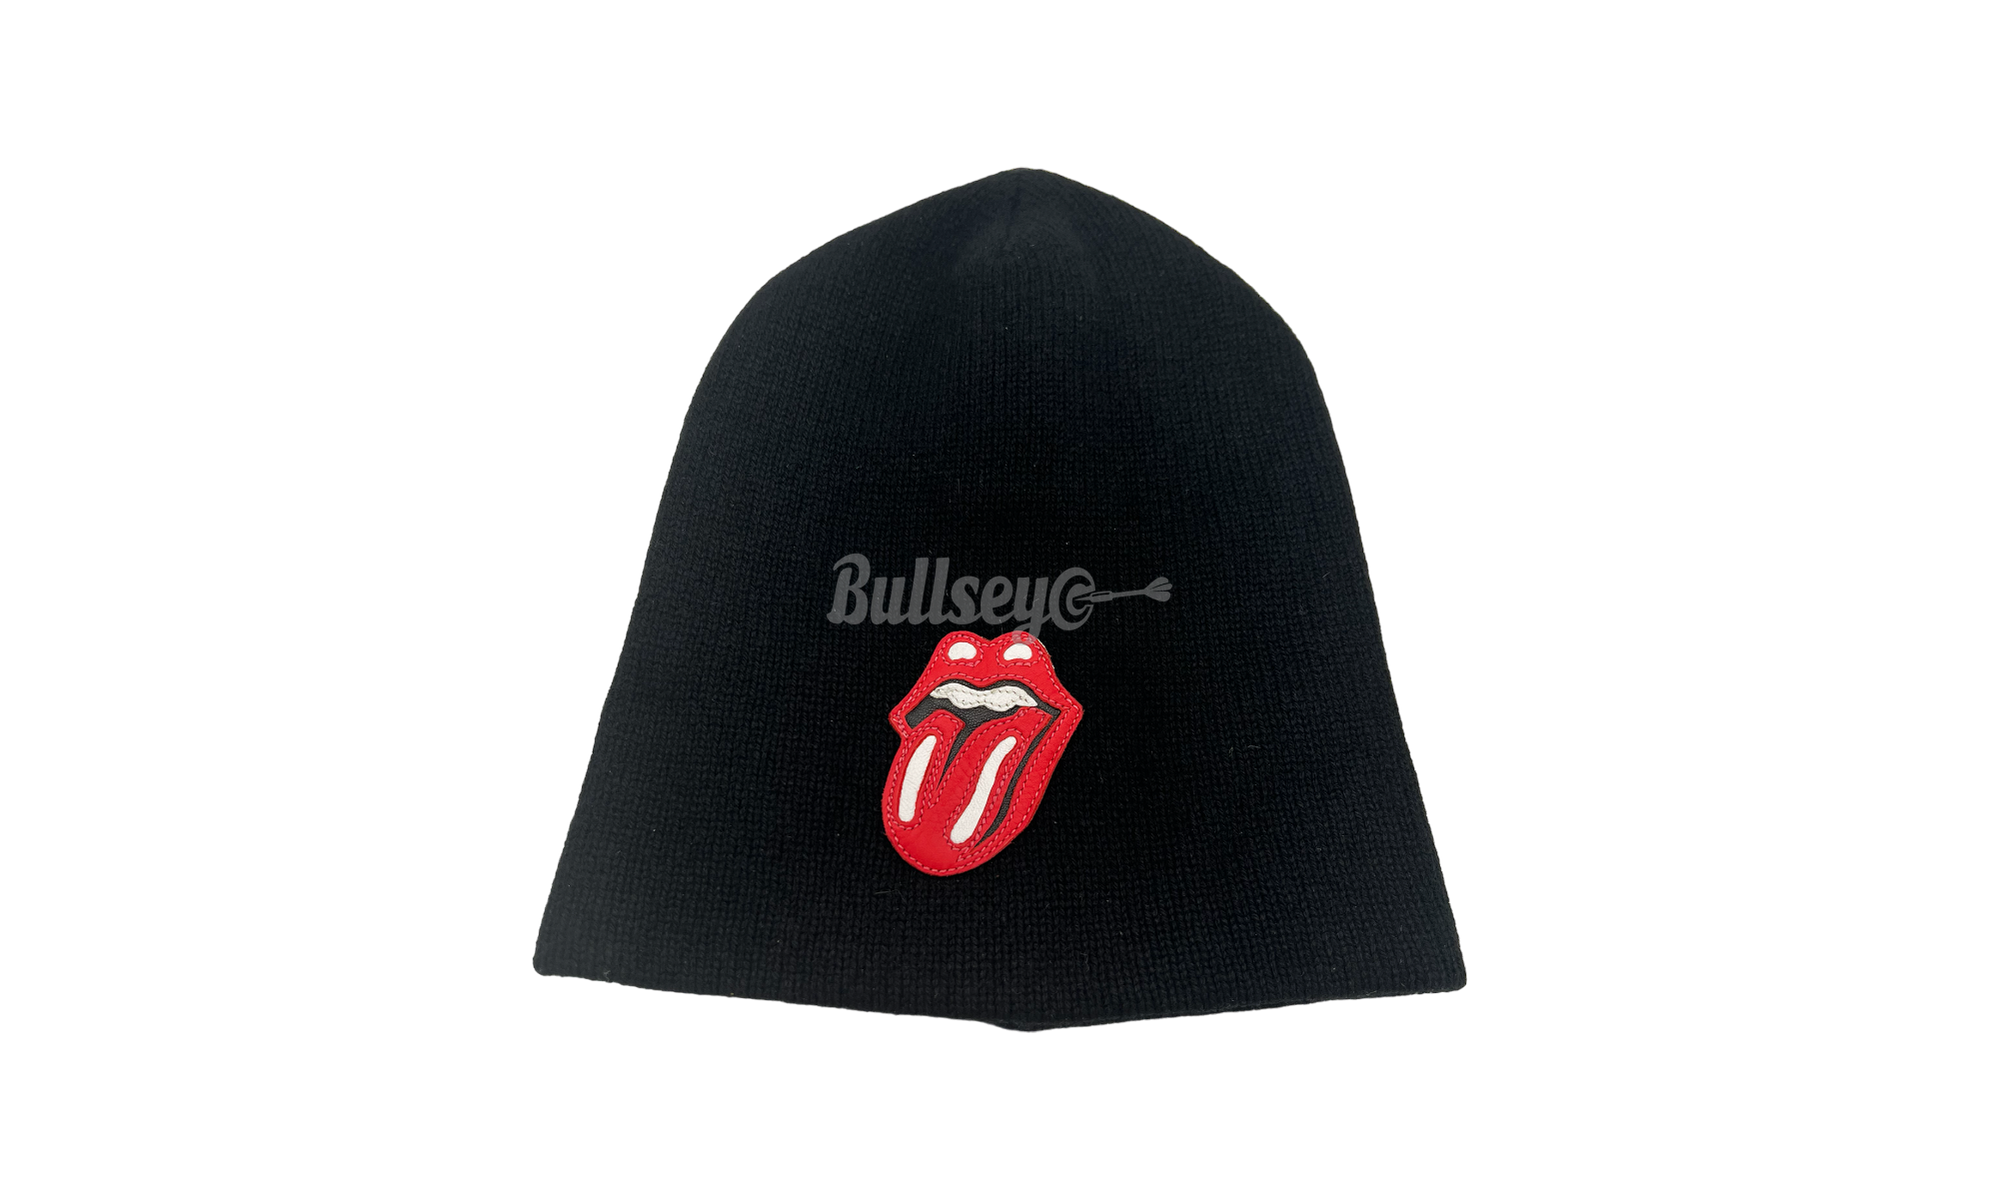 Chrome Hearts Rolling Stones Beanie